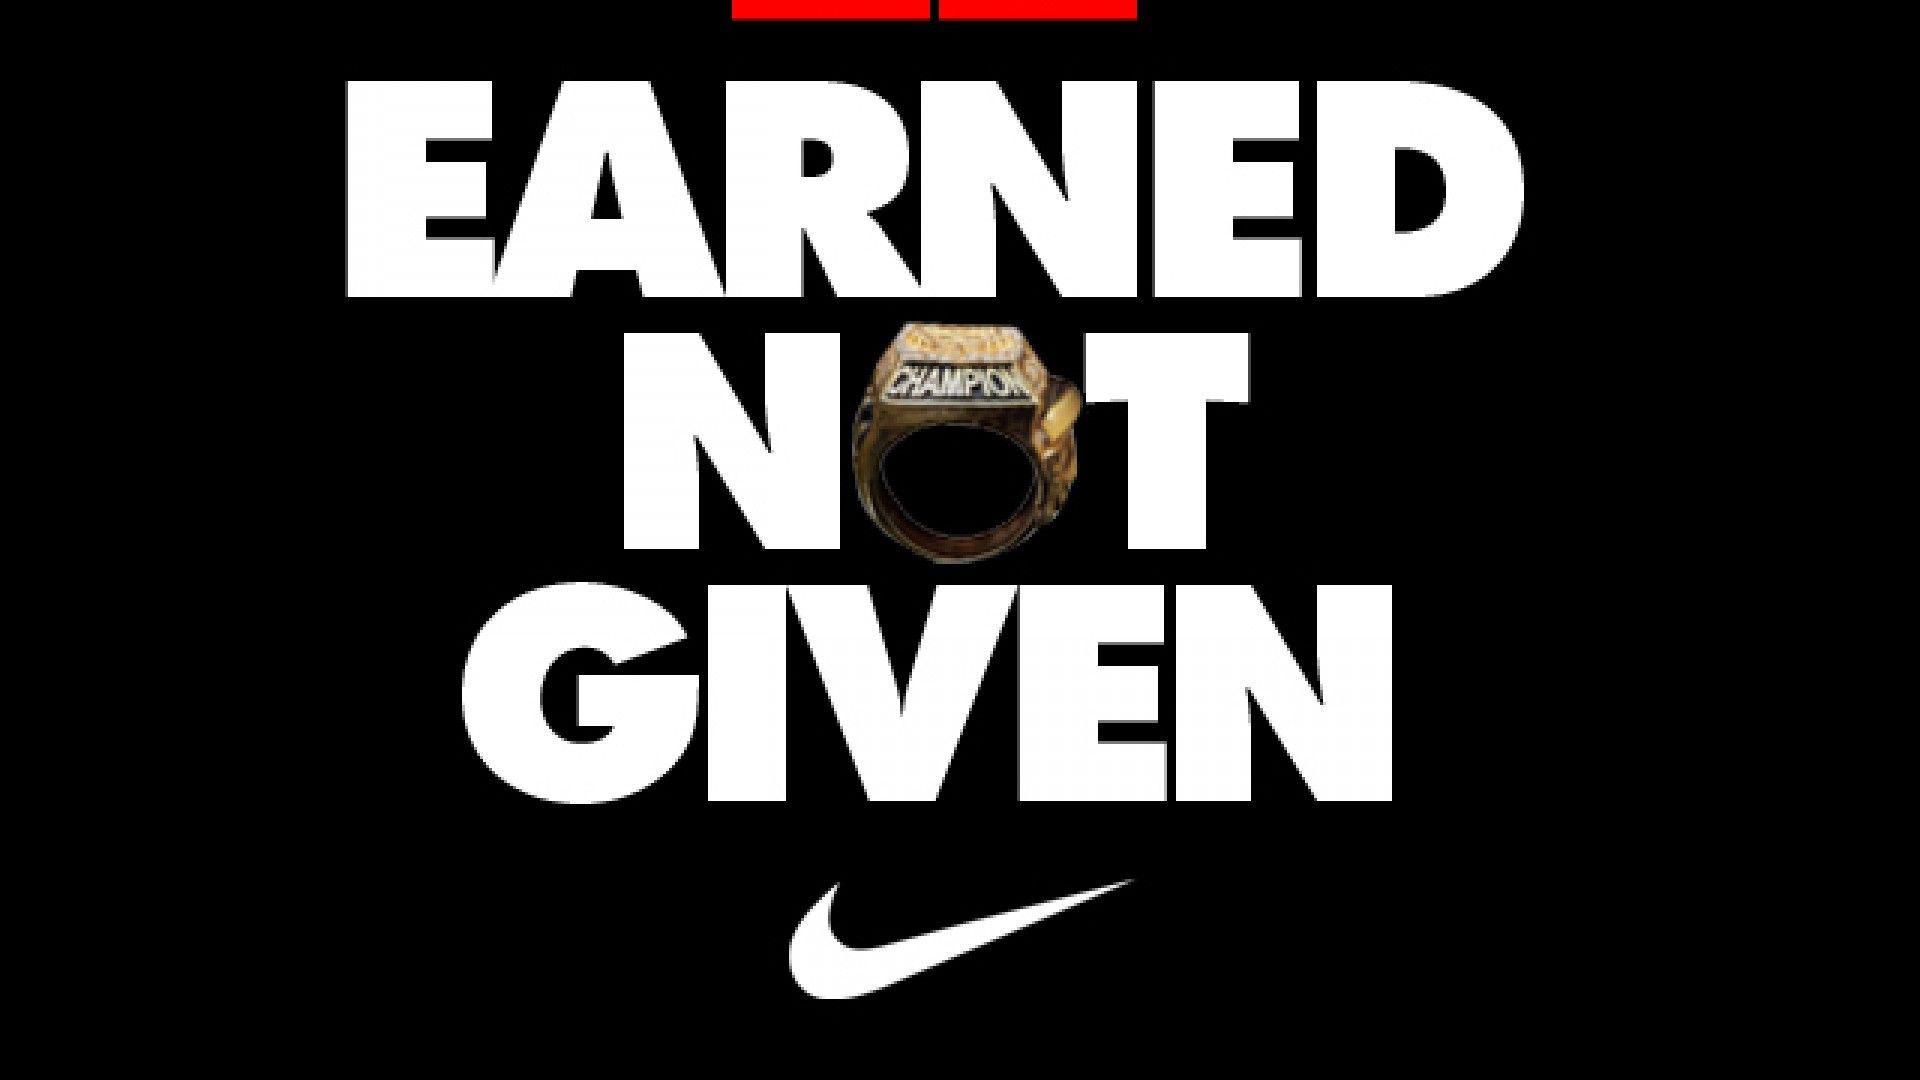 Nike Quotes Basketball Wallpapers